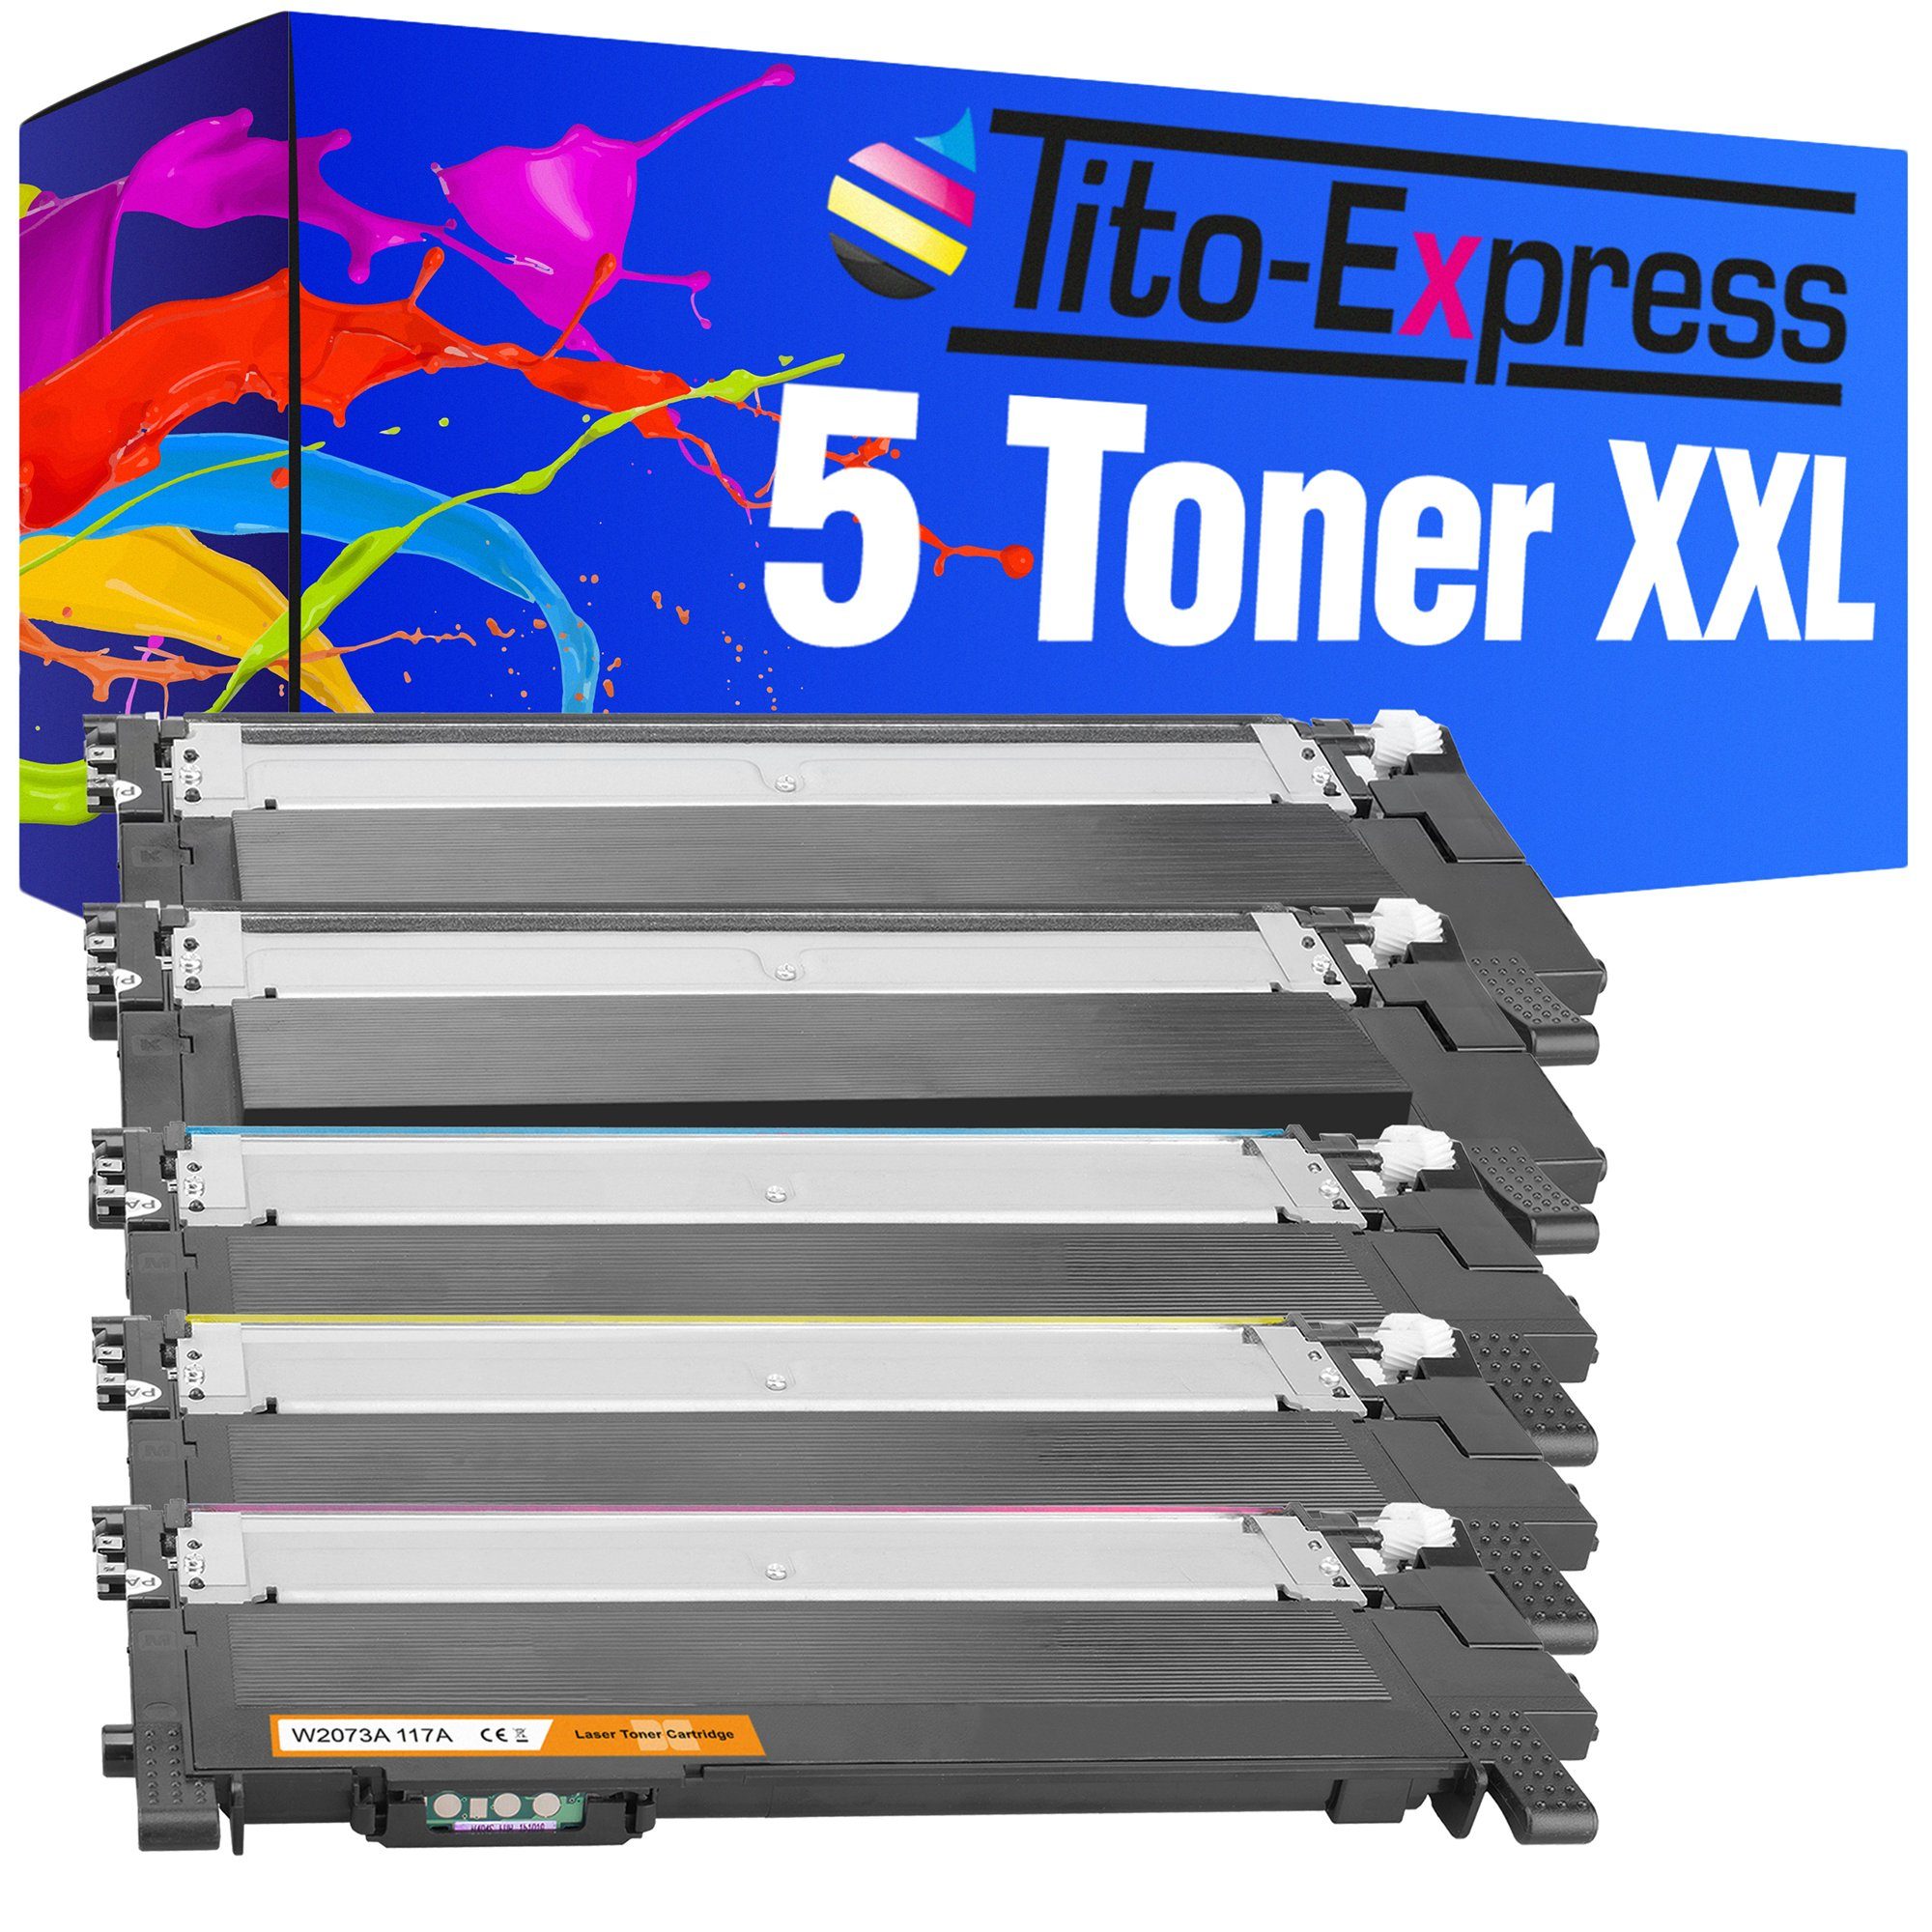 Tito-Express Tonerpatrone 5er Set ersetzt HP W2070A W2071A W2072A W2073A HP 117A, (Multipack, 2x Black, 1x Cyan, 1x Magenta, 1x Yellow), für Color Laser MFP 178nwg 179fwg 150nw 179fnw 150a 178nw MFP-170 | Tonerpatronen